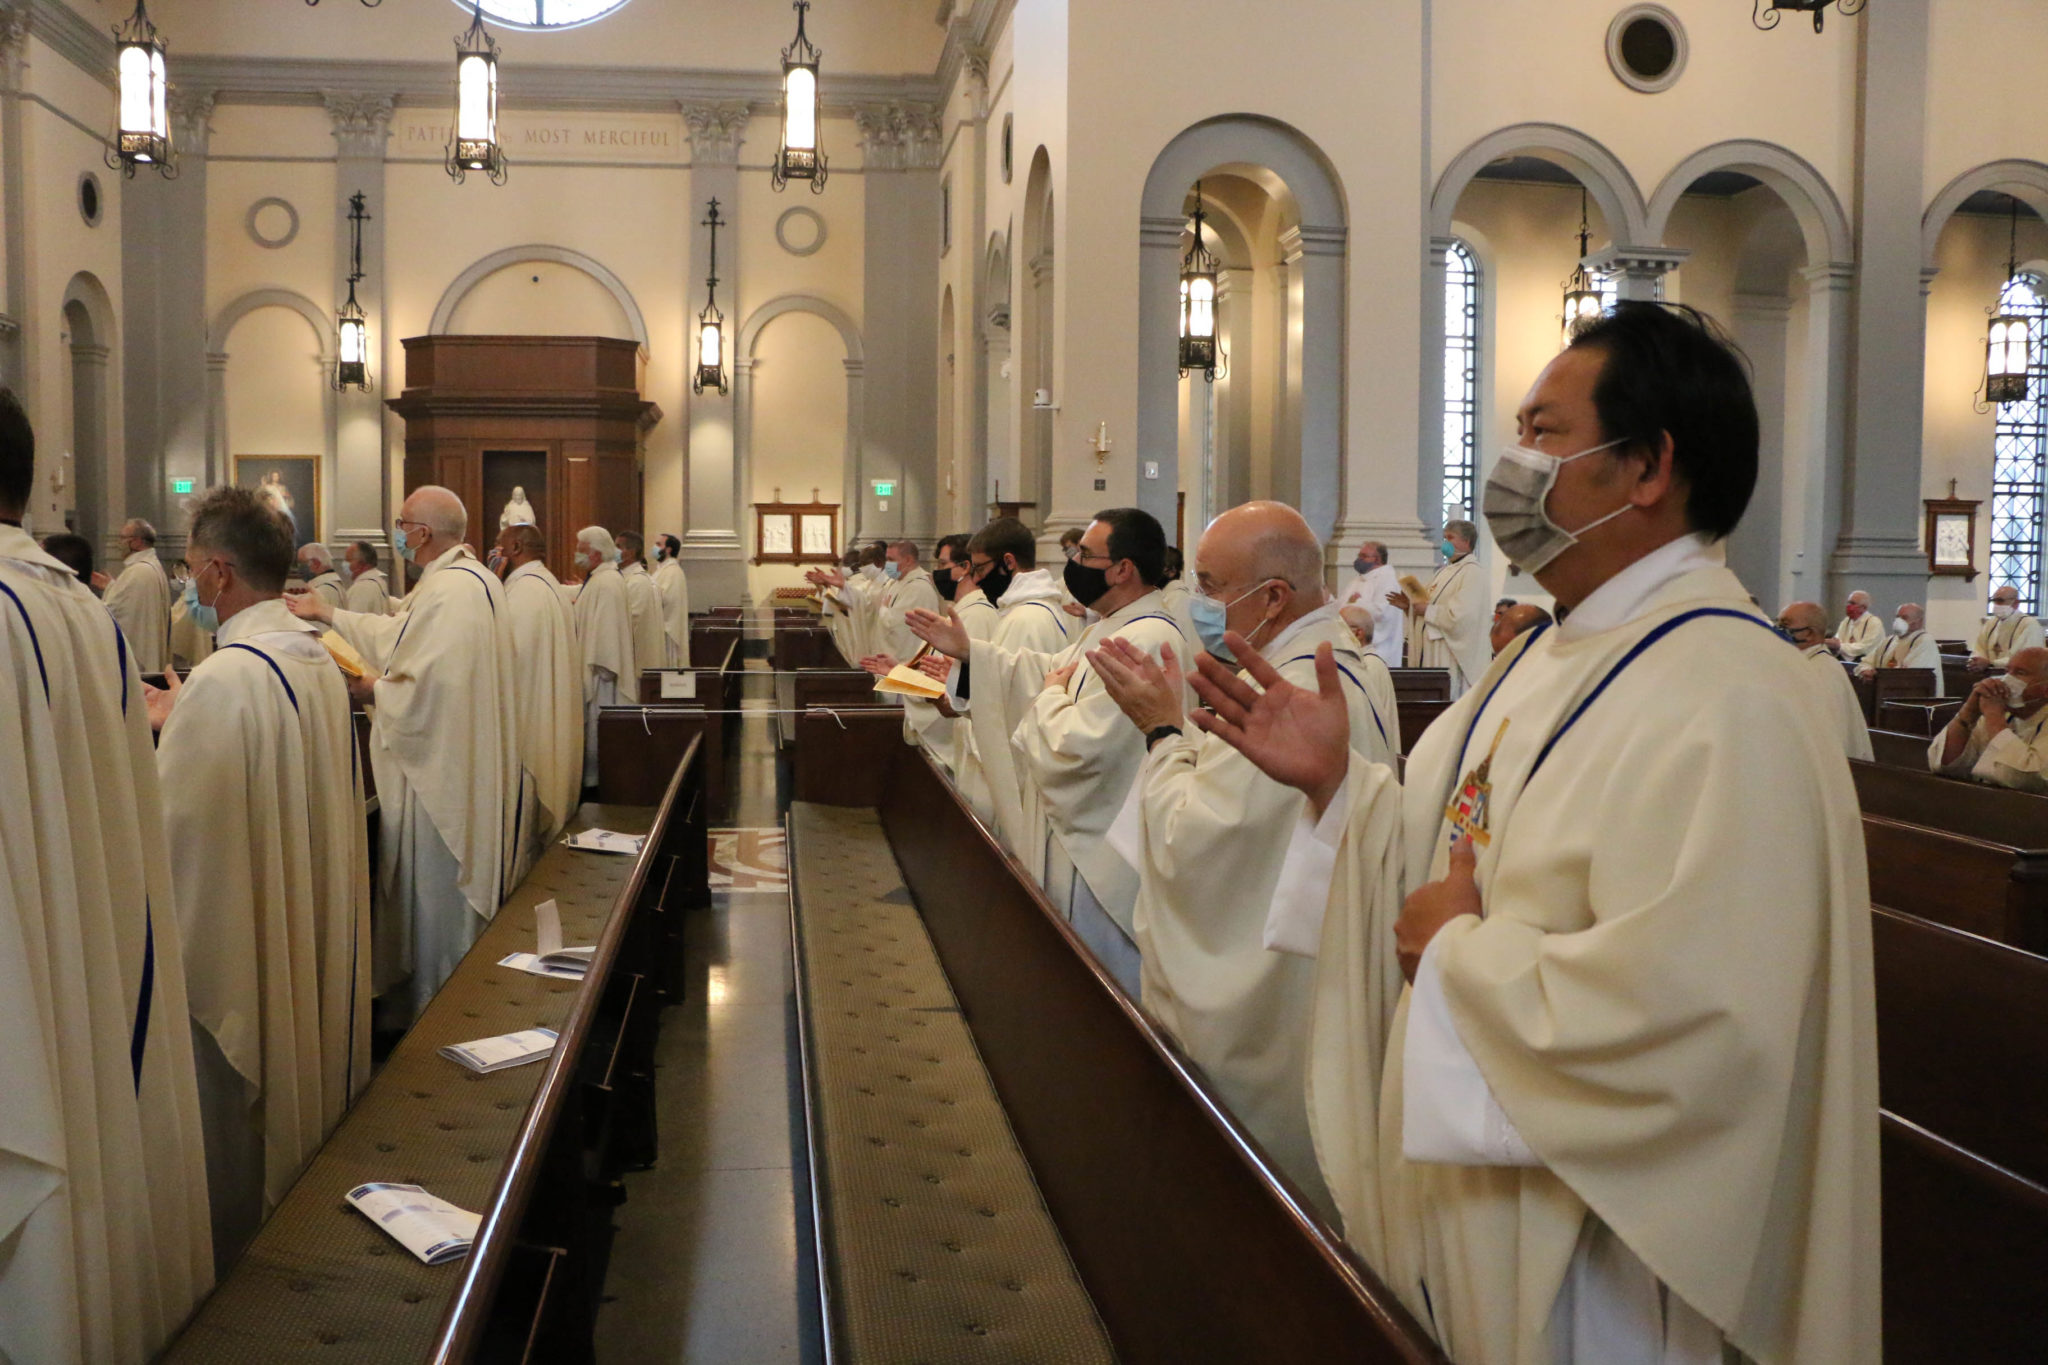 Chrism Mass leaves a lasting impression during ‘coronatide’ East